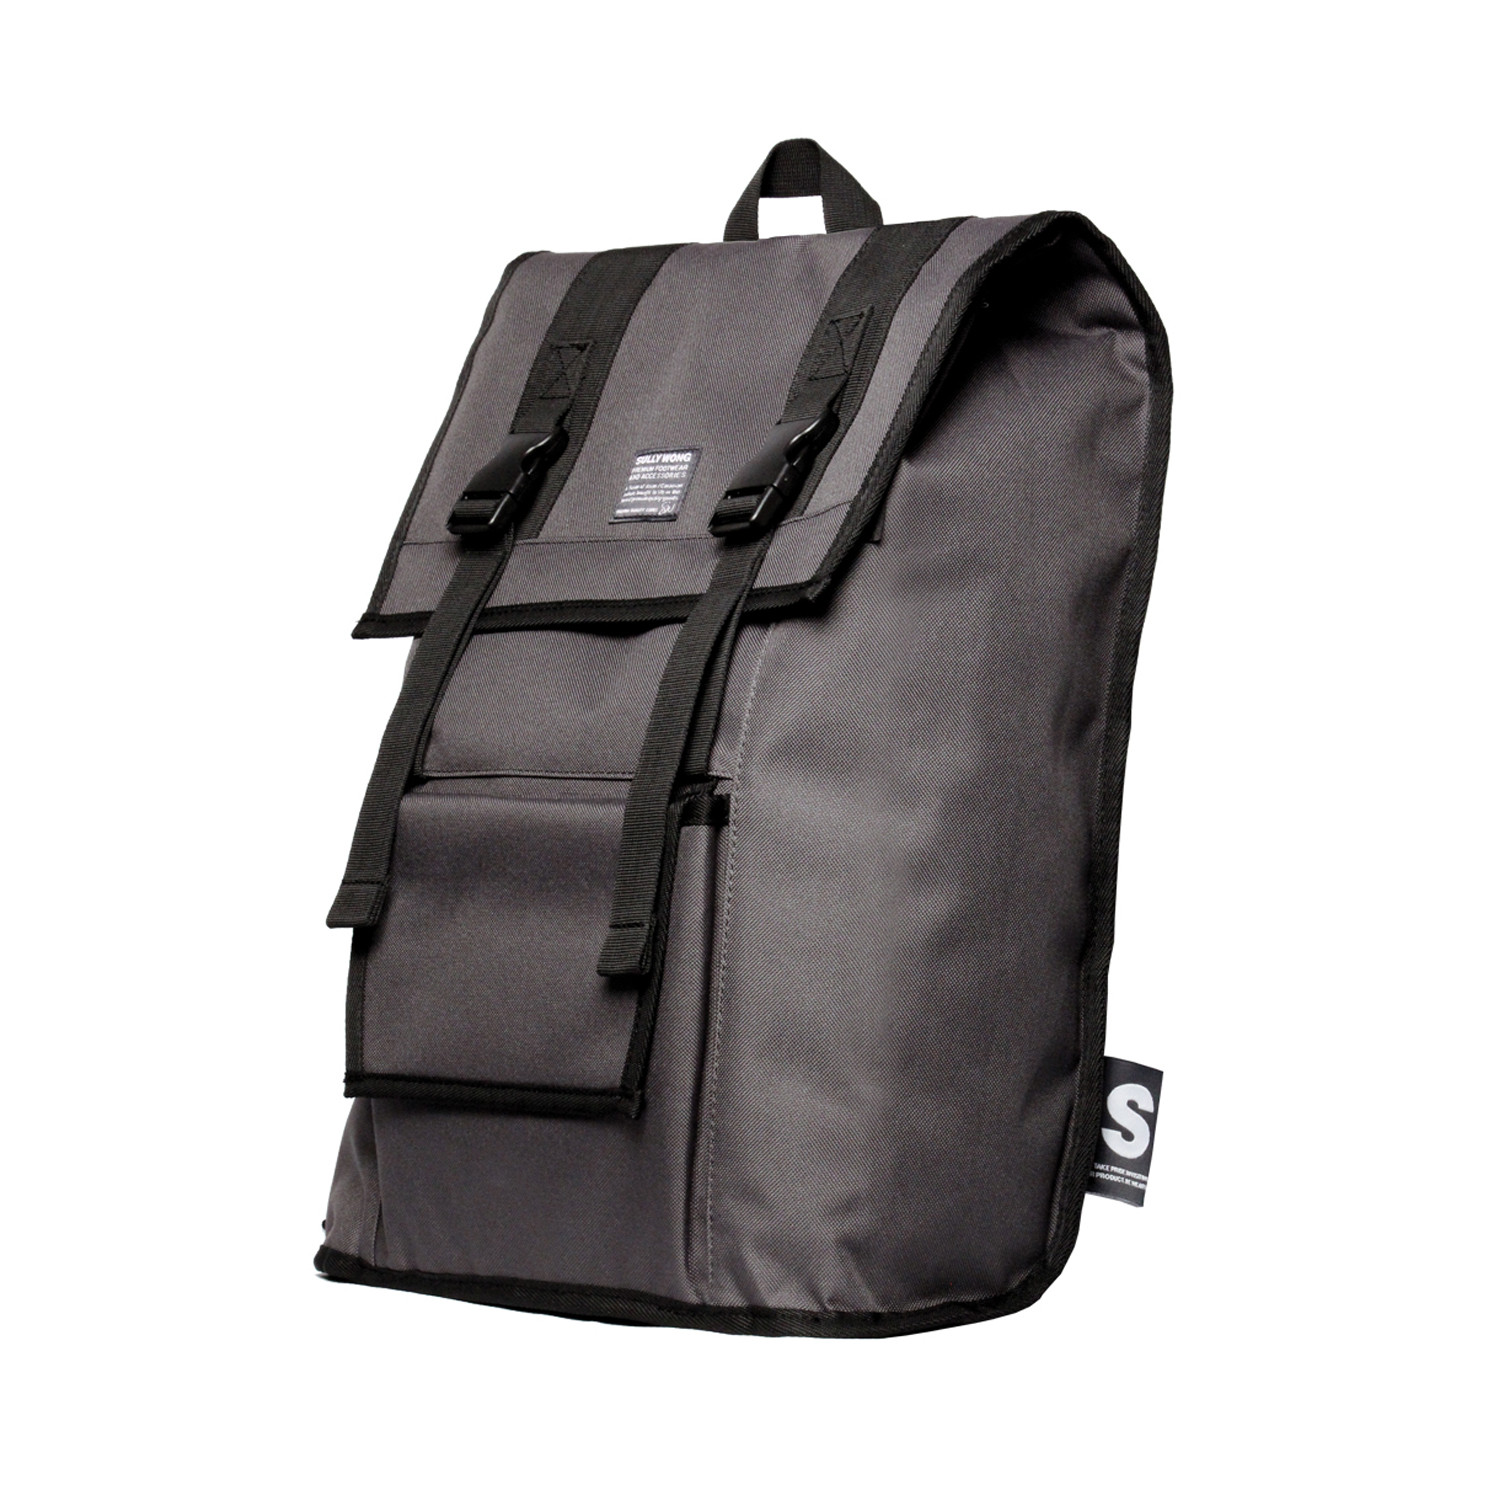 Nomad Backpack (Grey) - Sully Wong - Touch of Modern